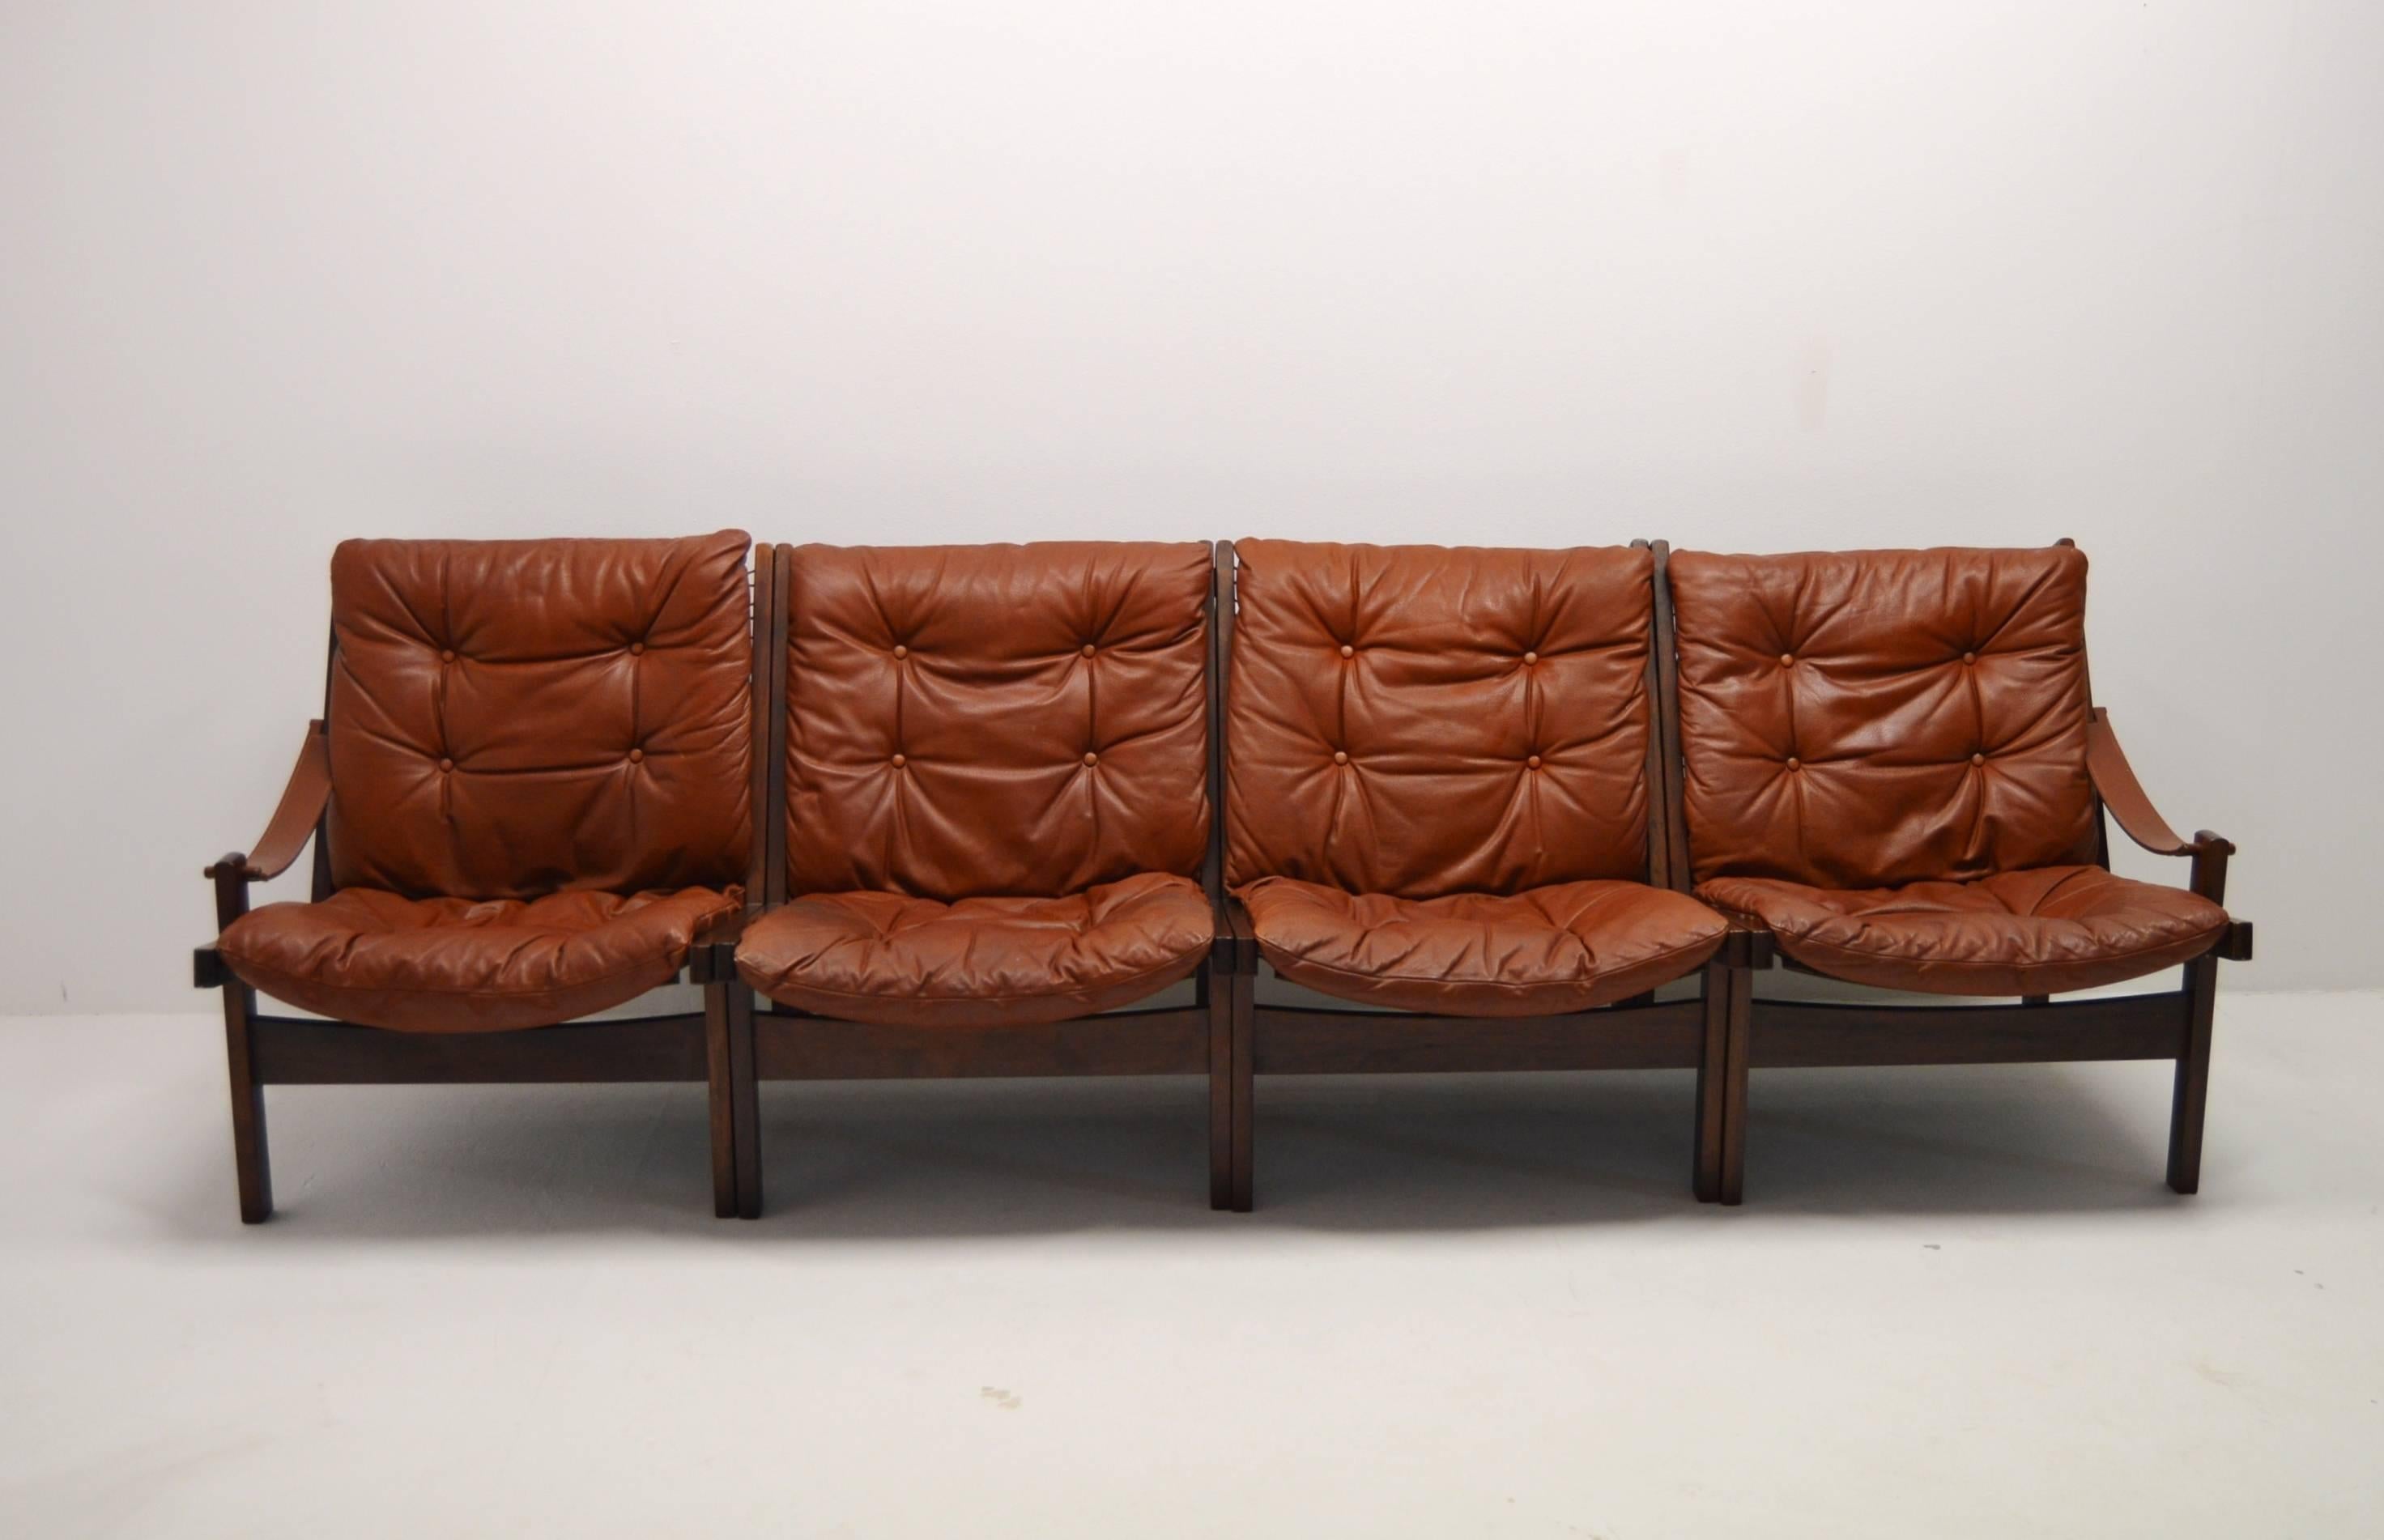 Rare sofa set by Torbjørn Afdal, Bruksbo Norway.
With this set you can combine your own sofa group. A four-seat sofa, a two-seat sofa and two armchairs or other possible combinations.
Two sections with one armrest each, and these are supposed to